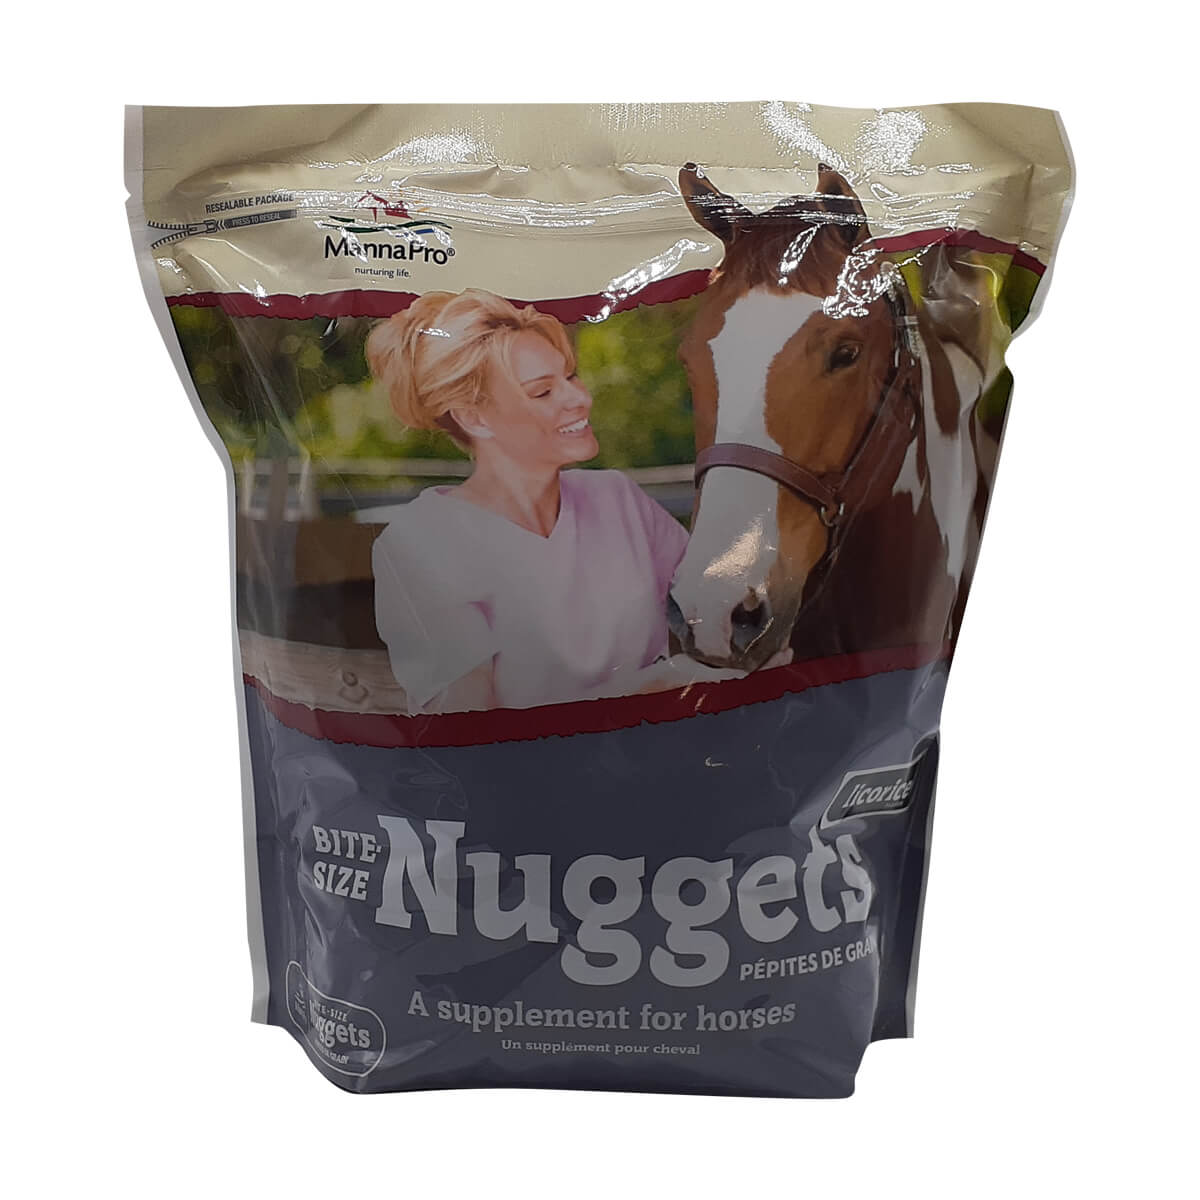 Bite-Sized Apple Nuggets for Horses - Licorice - 5 lb